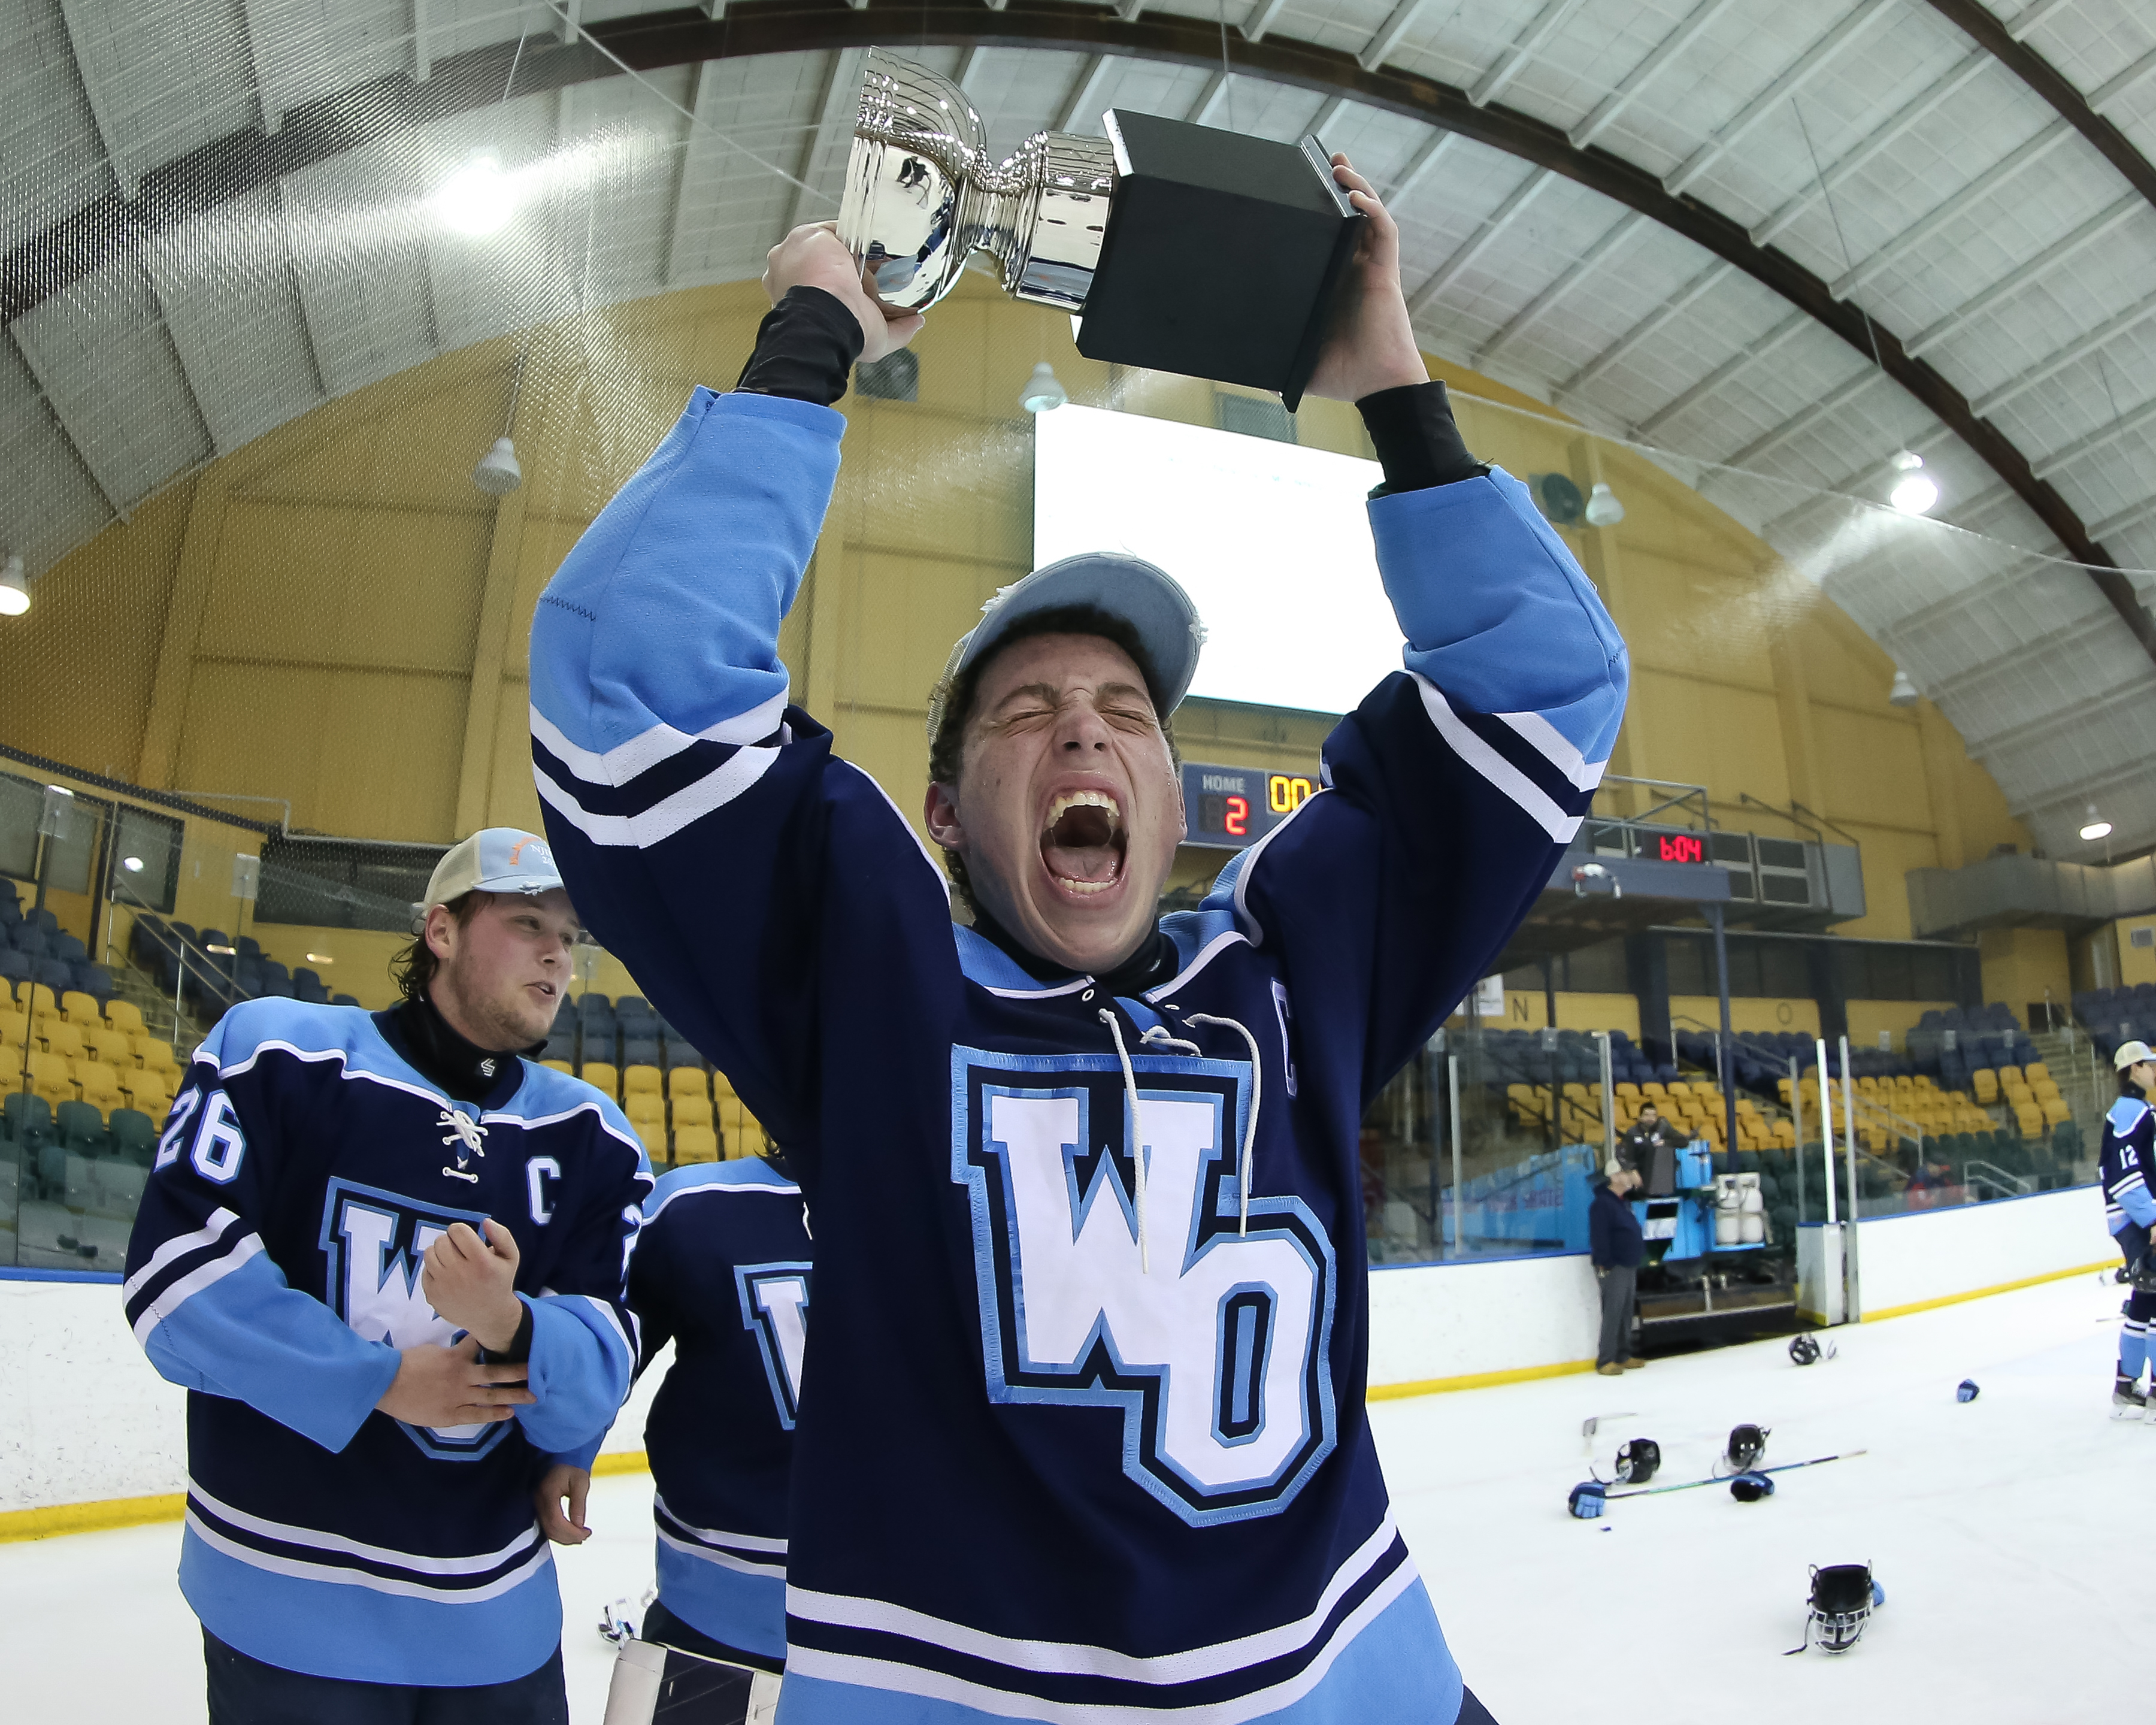 Hockey player, 'Miracle' star remembered by former UMaine